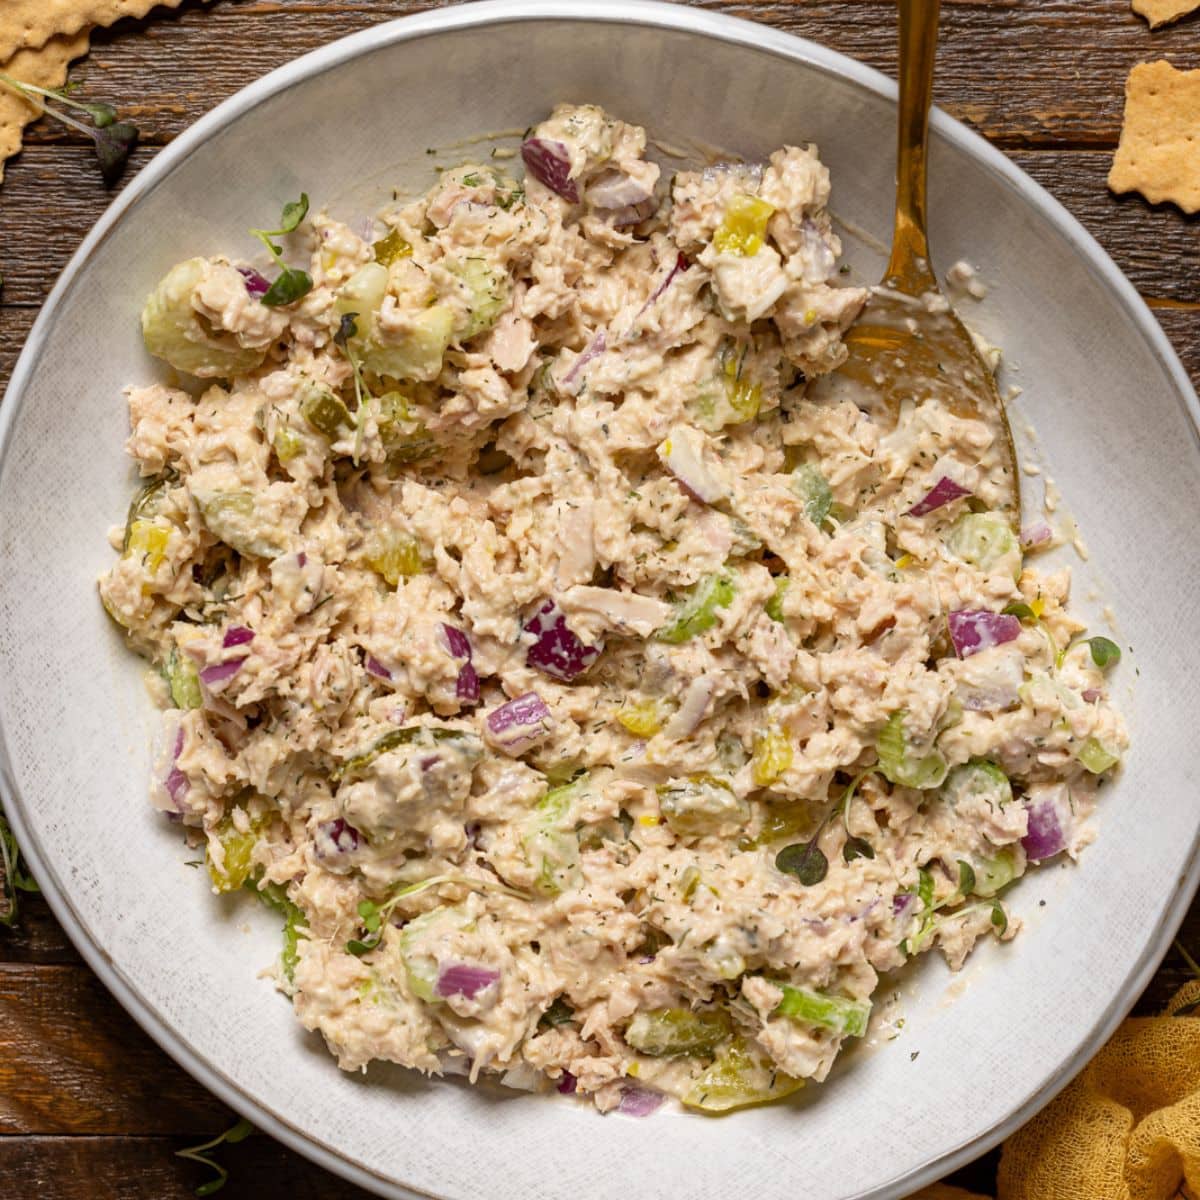 Tuna salad in a plate with a spoon and crackers.